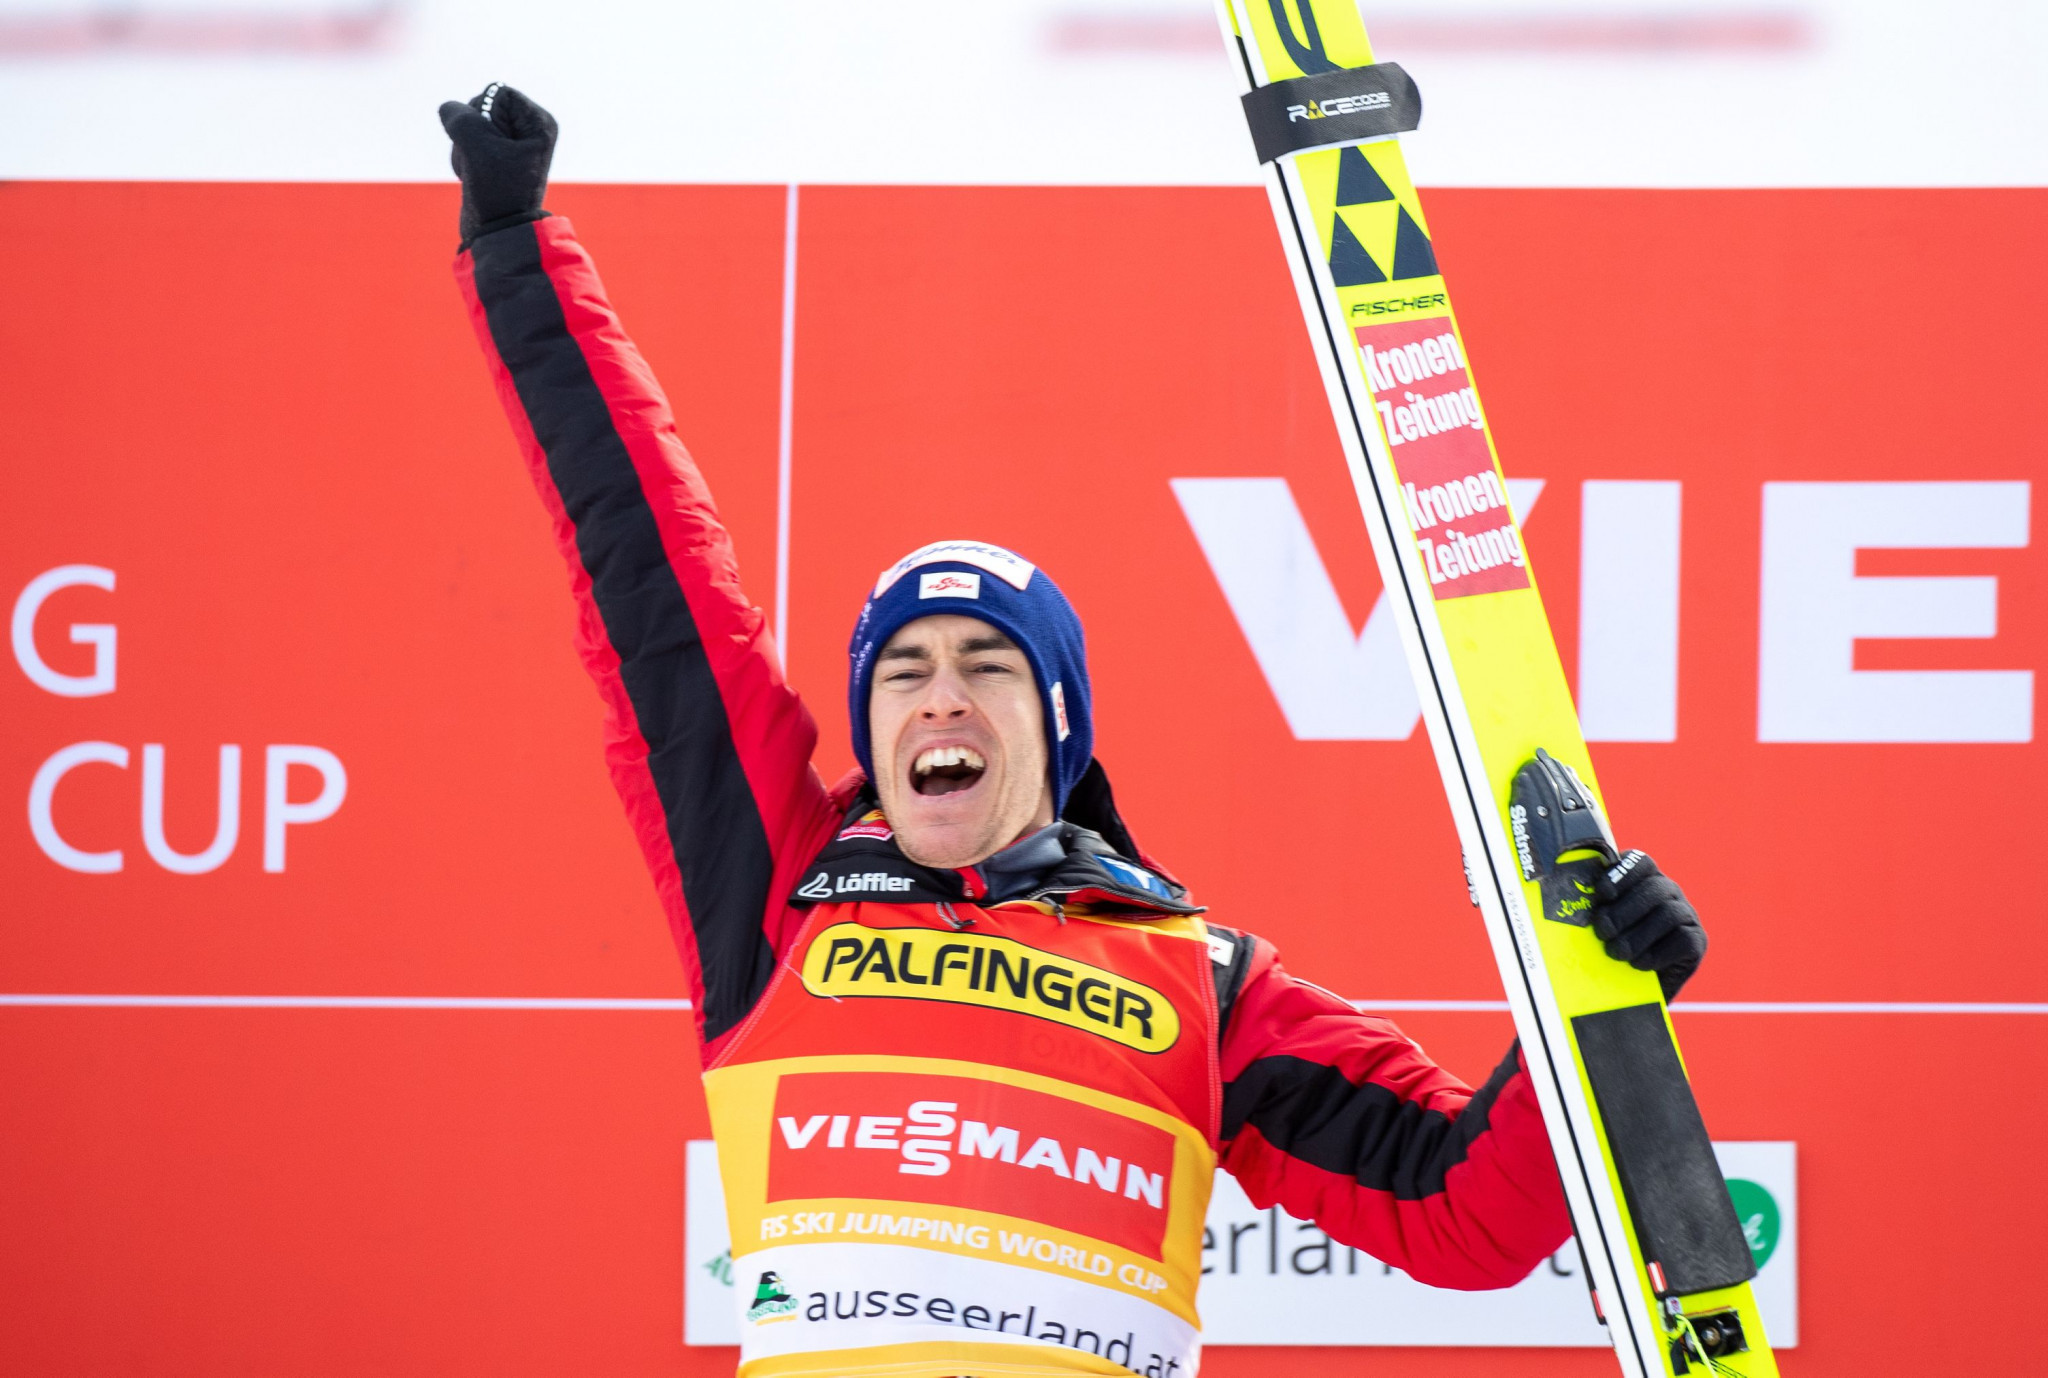 Kraft wins 20th Ski Jumping World Cup event to extend overall lead in Râșnov